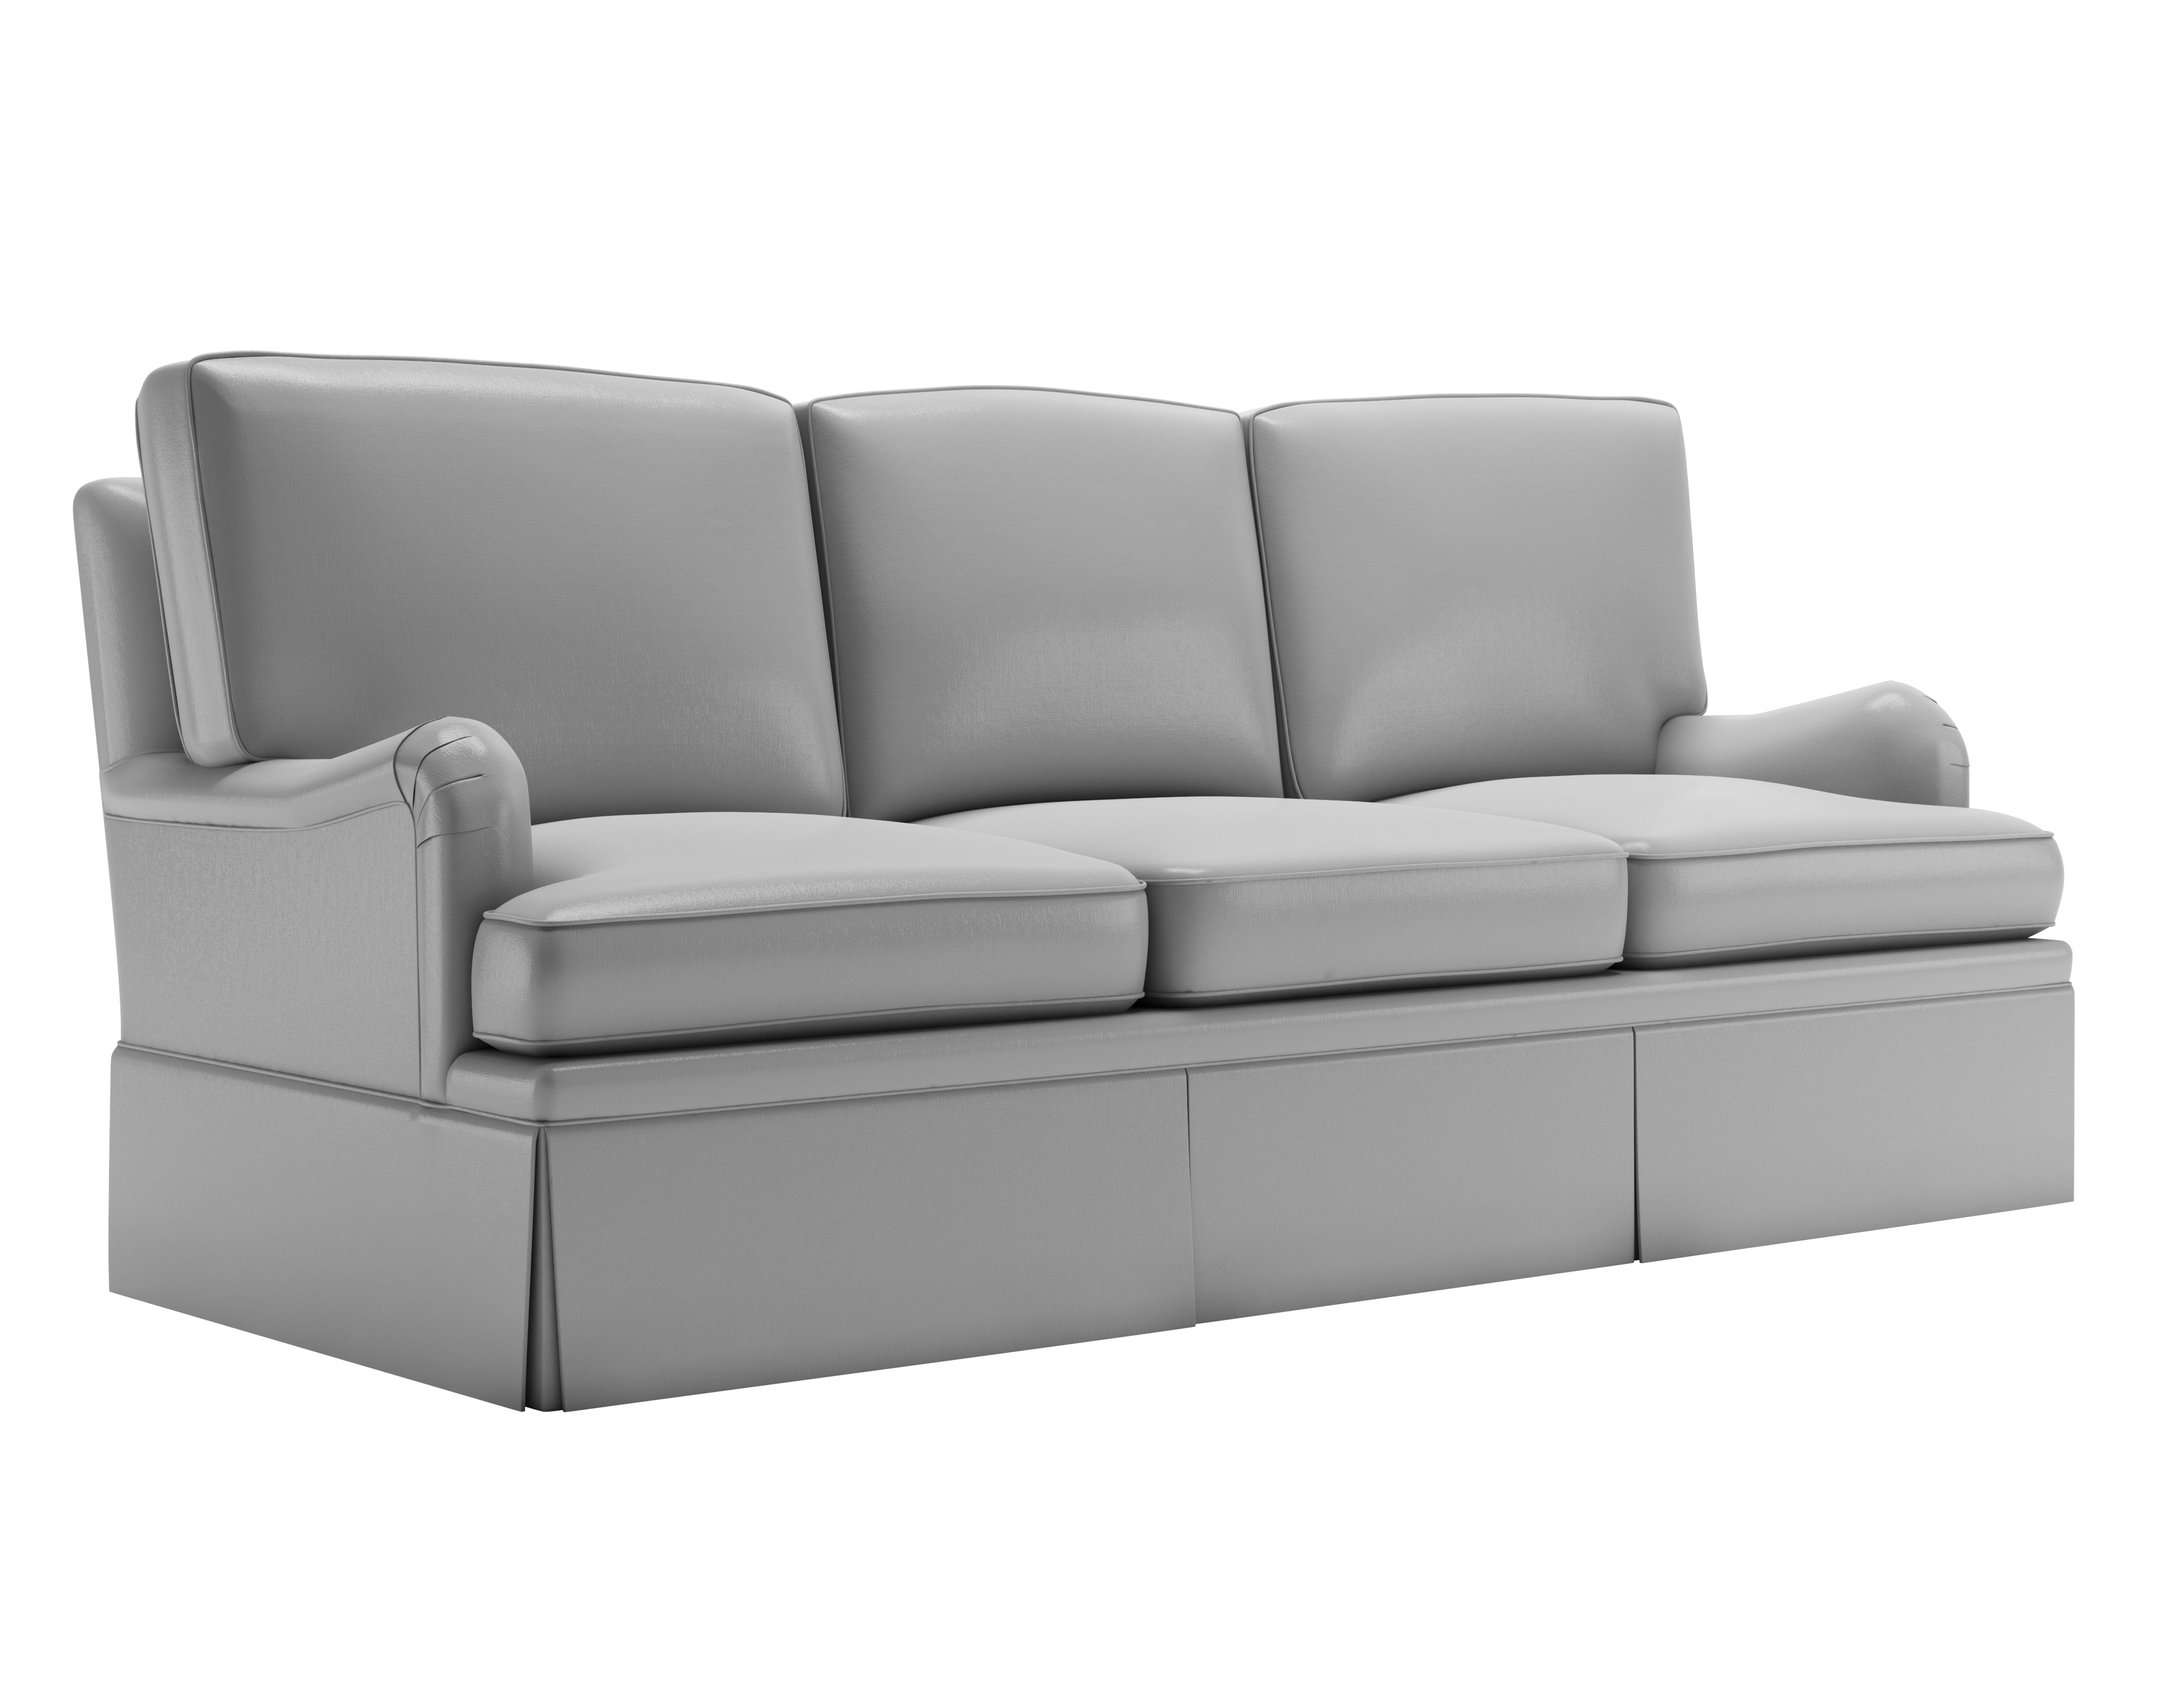 Sofa Style 1 - Clay Render